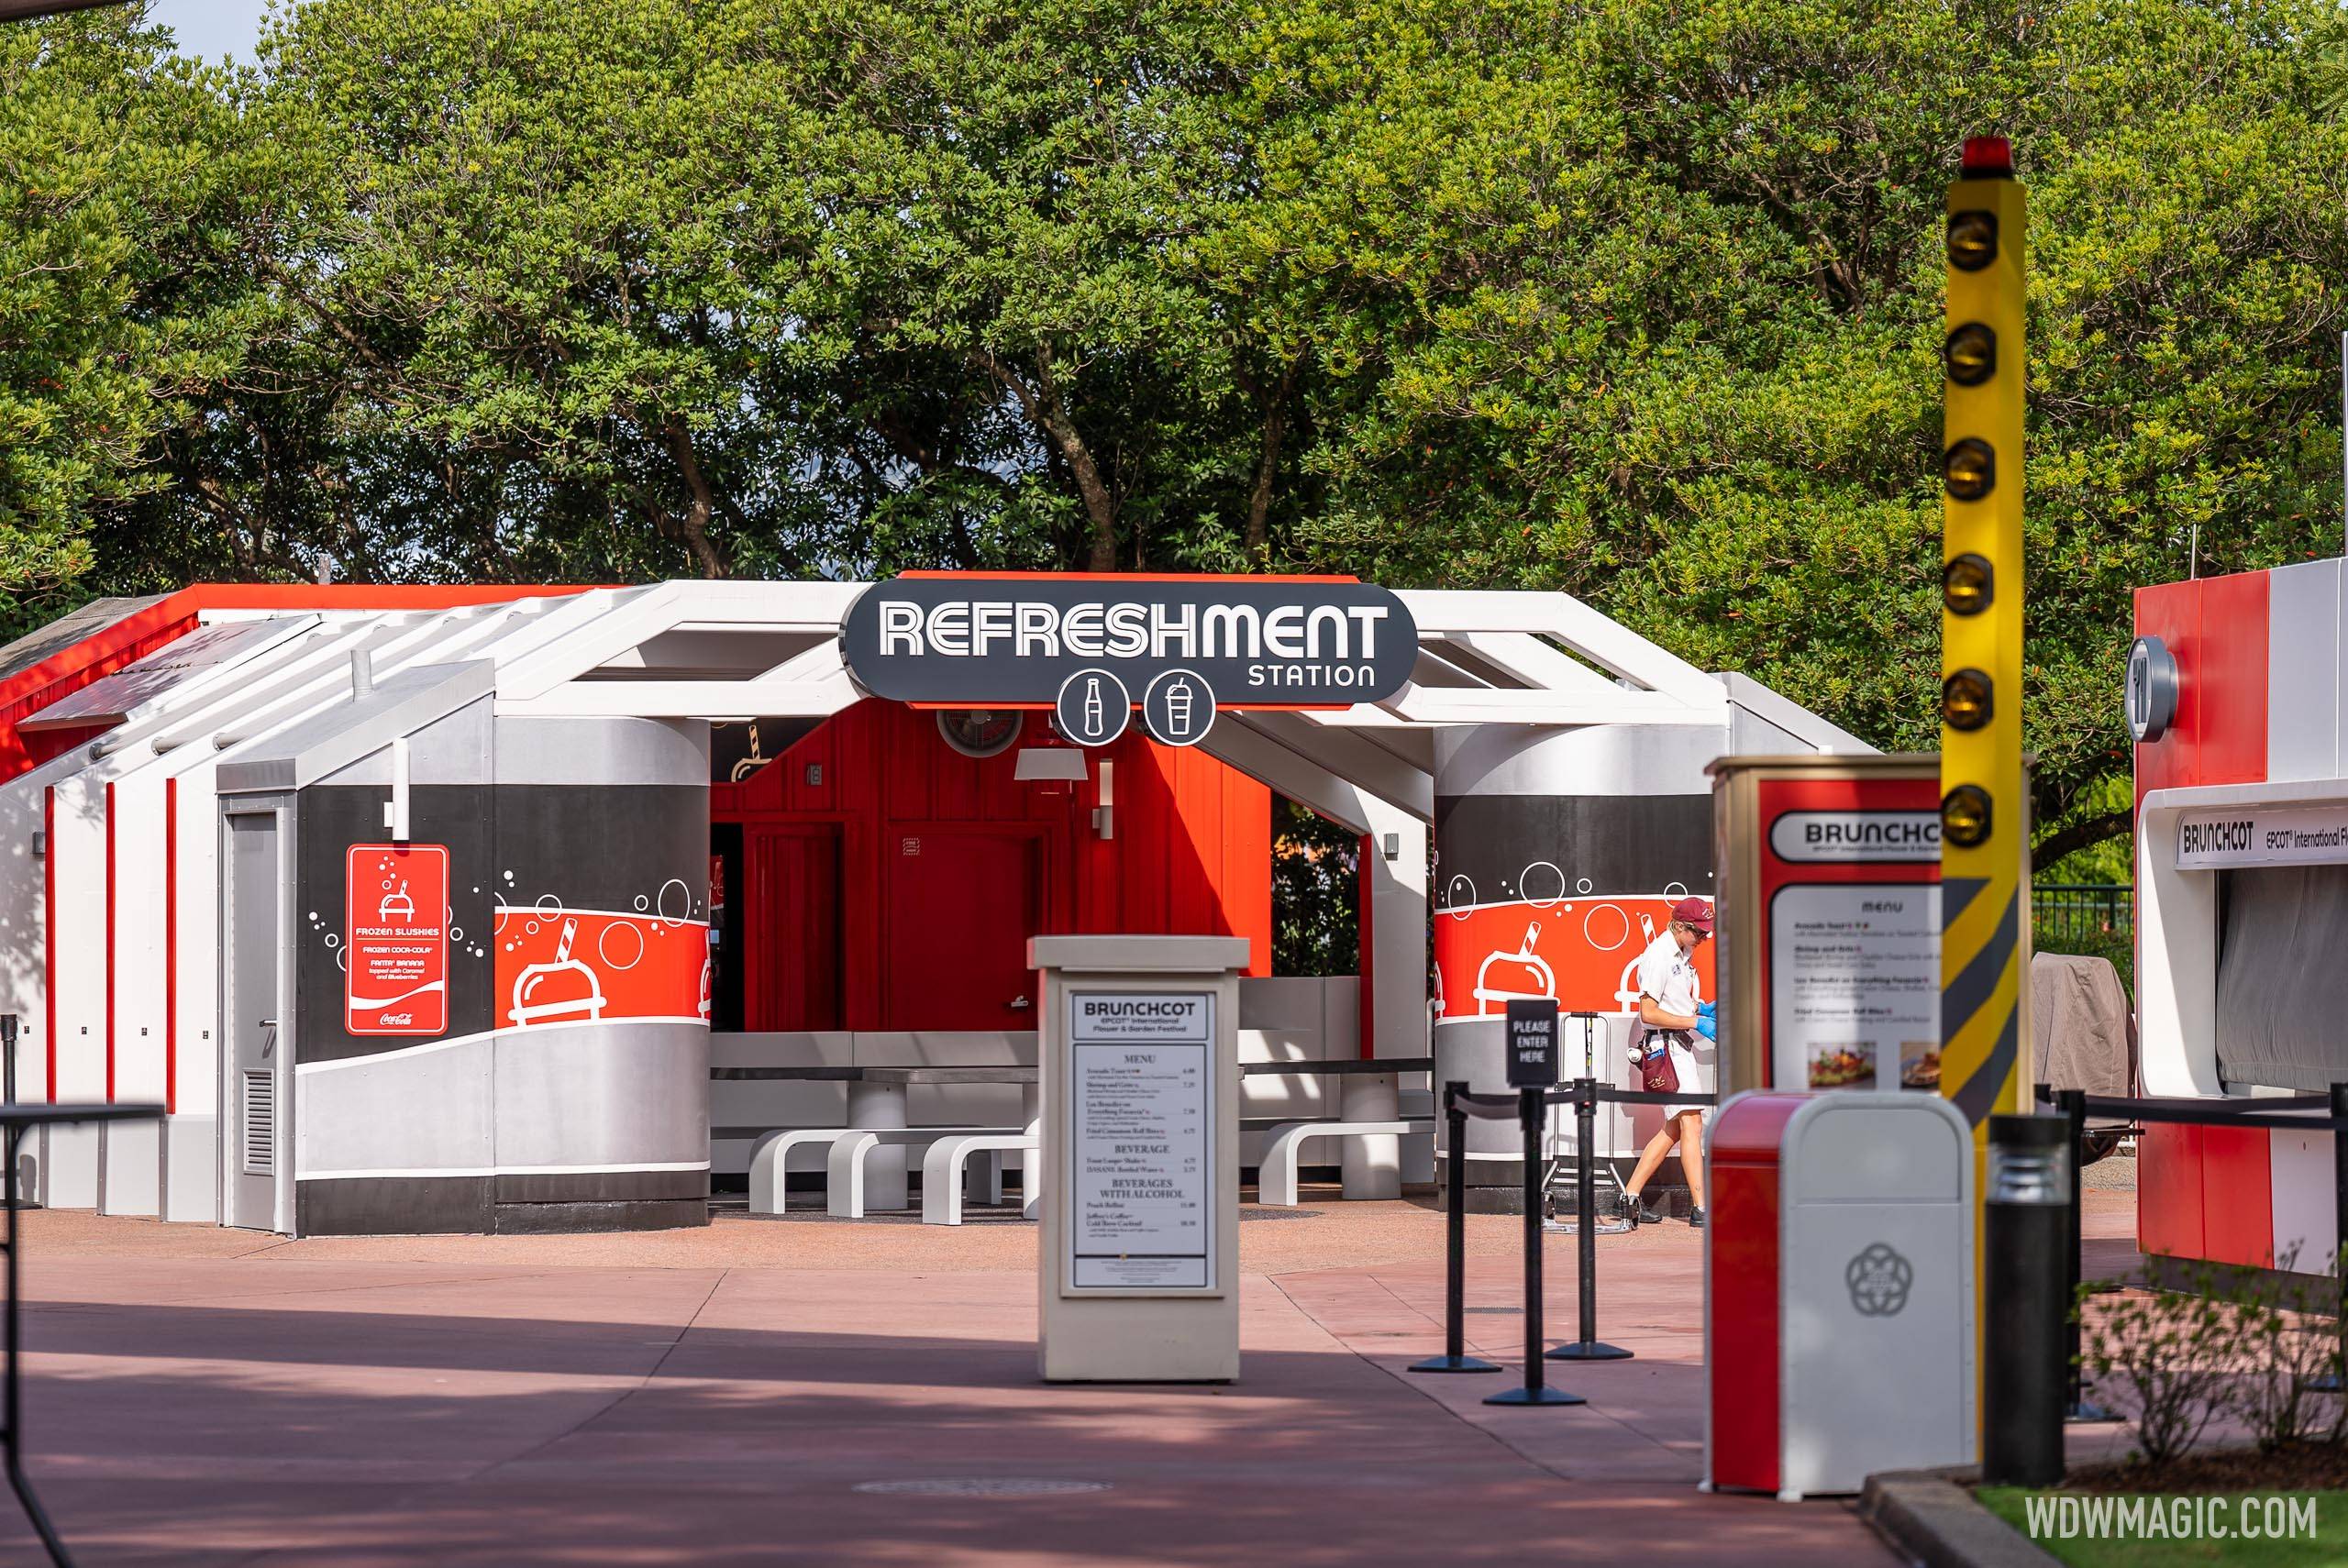 Refreshment Station overview